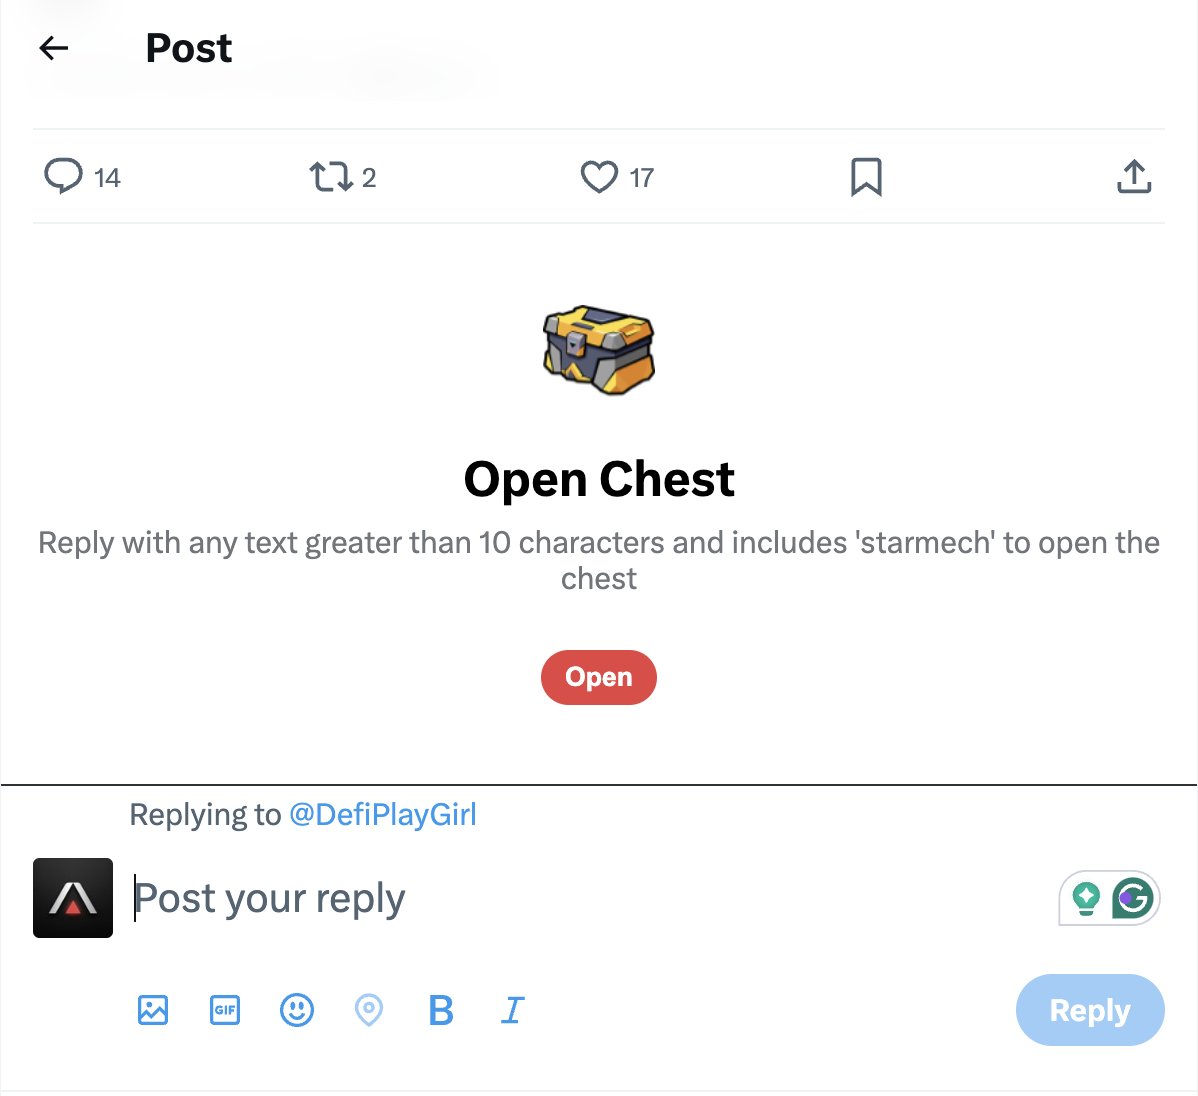 After clicking on the chest, make a thread to that post 'Reply with any text greater than 10 characters and includes 'starmech' to open the chest' ⚡️ Then you can 'open' the chest with $MECH rewards!